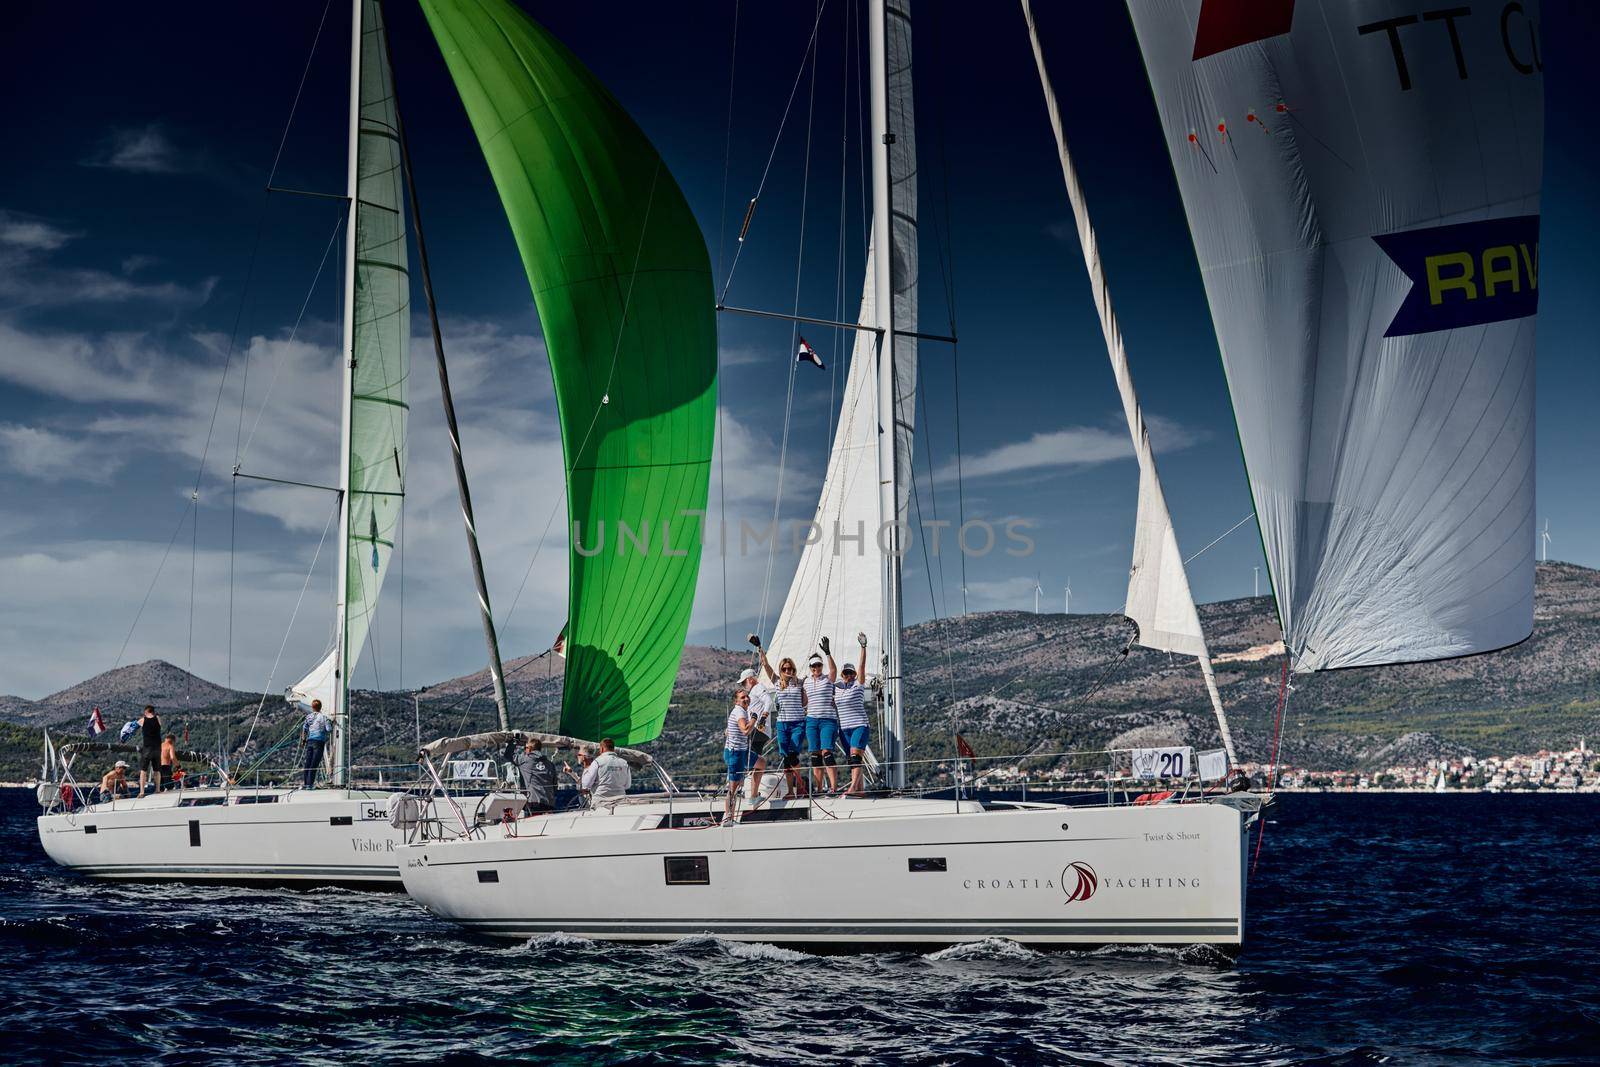 Croatia, Mediterranean Sea, 18 September 2019: The women's team of sailboat celebrates a victory, sailboats compete in a sail regatta, a steering wheel, multicolored spinnakers